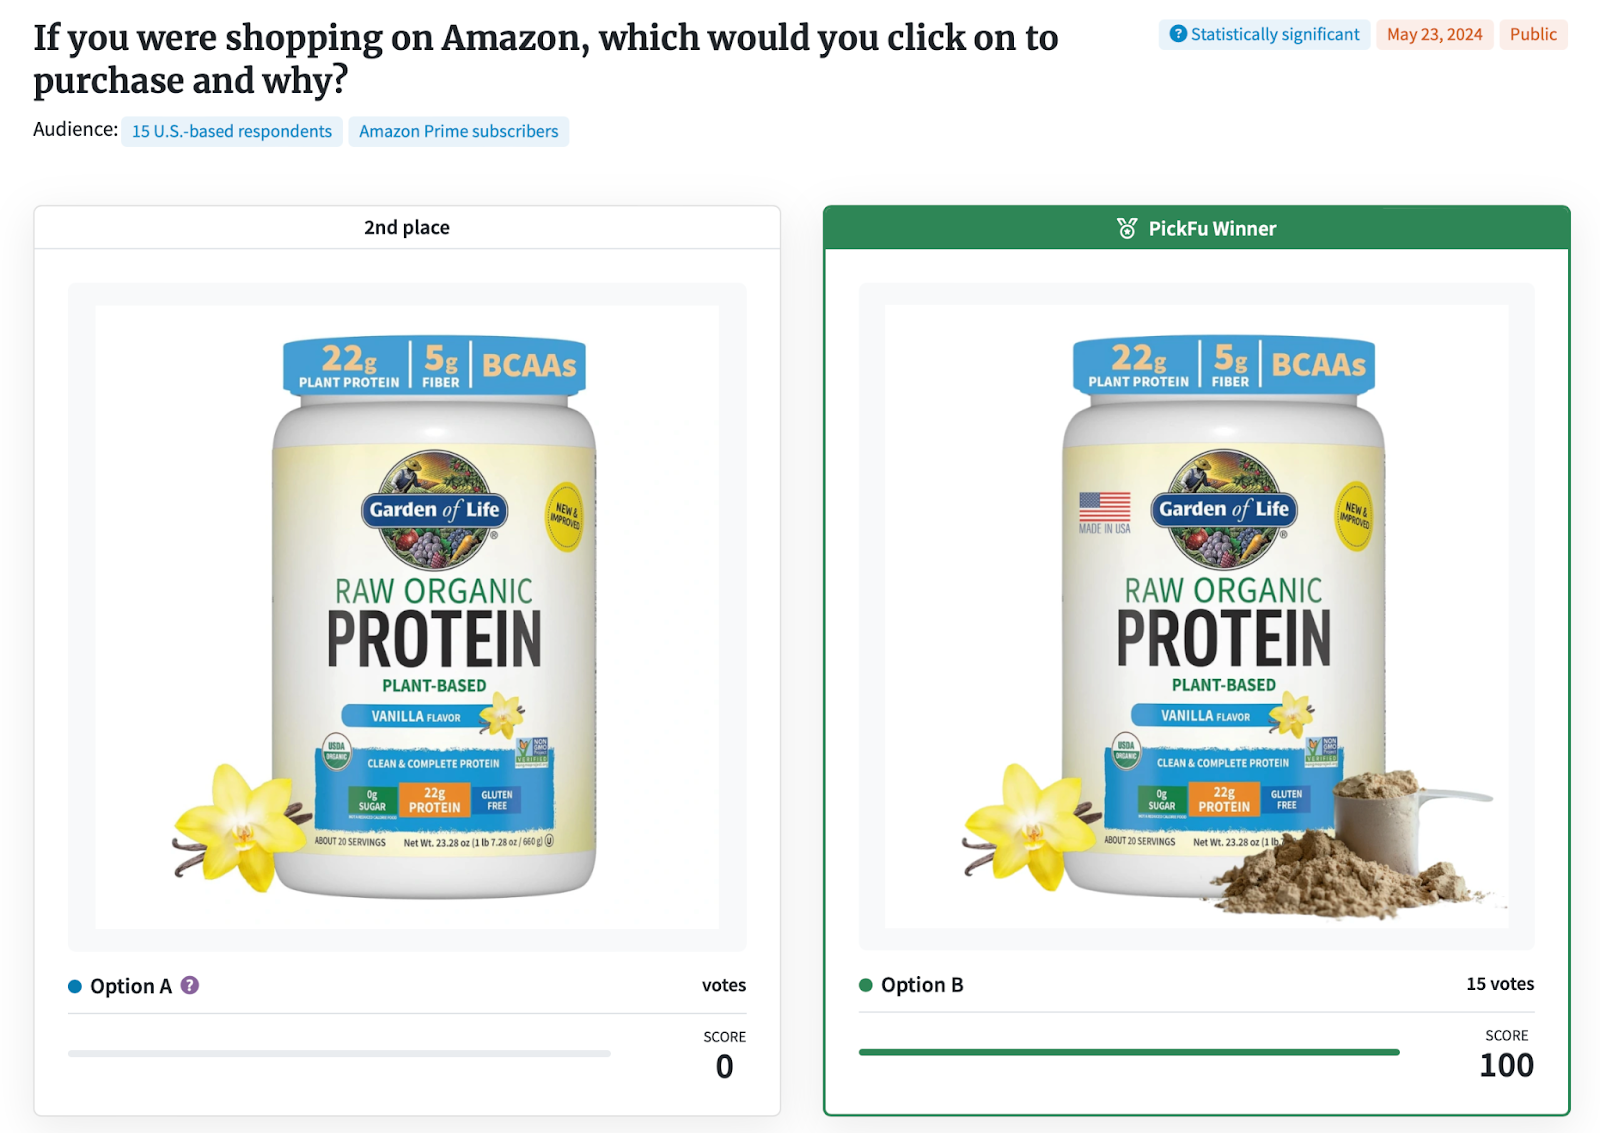 Screenshot of a PickFu poll comparing two images of an organic protein supplement powder, with Option B receiving 100% of the votes